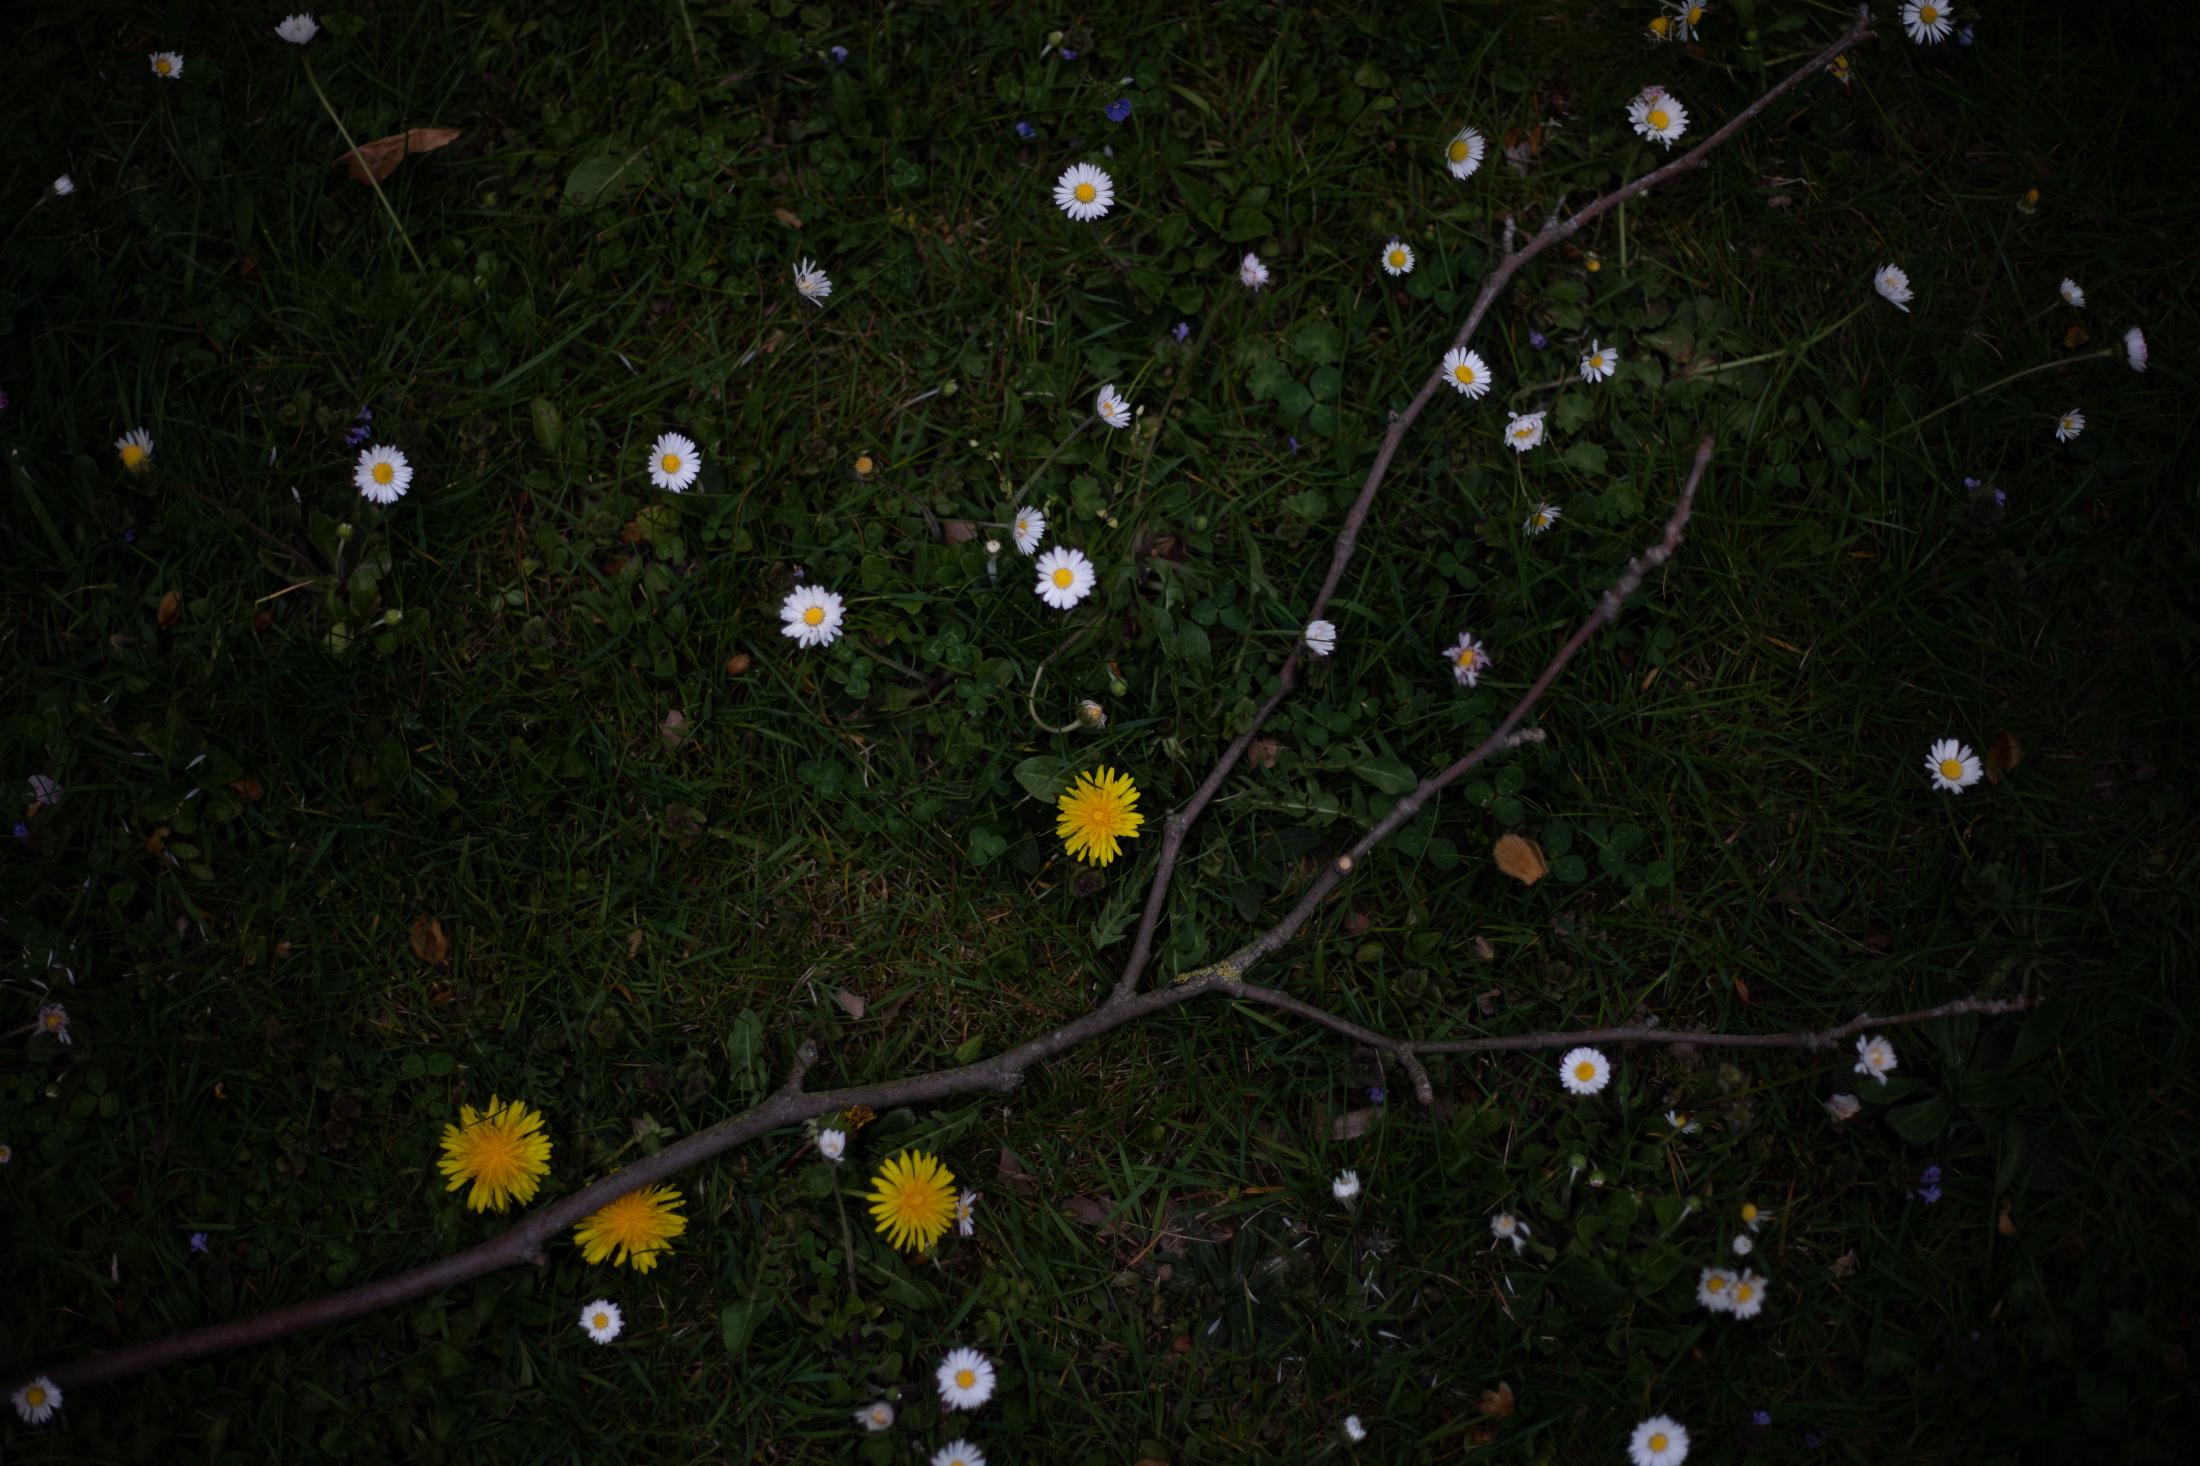 Wildflowers and branch